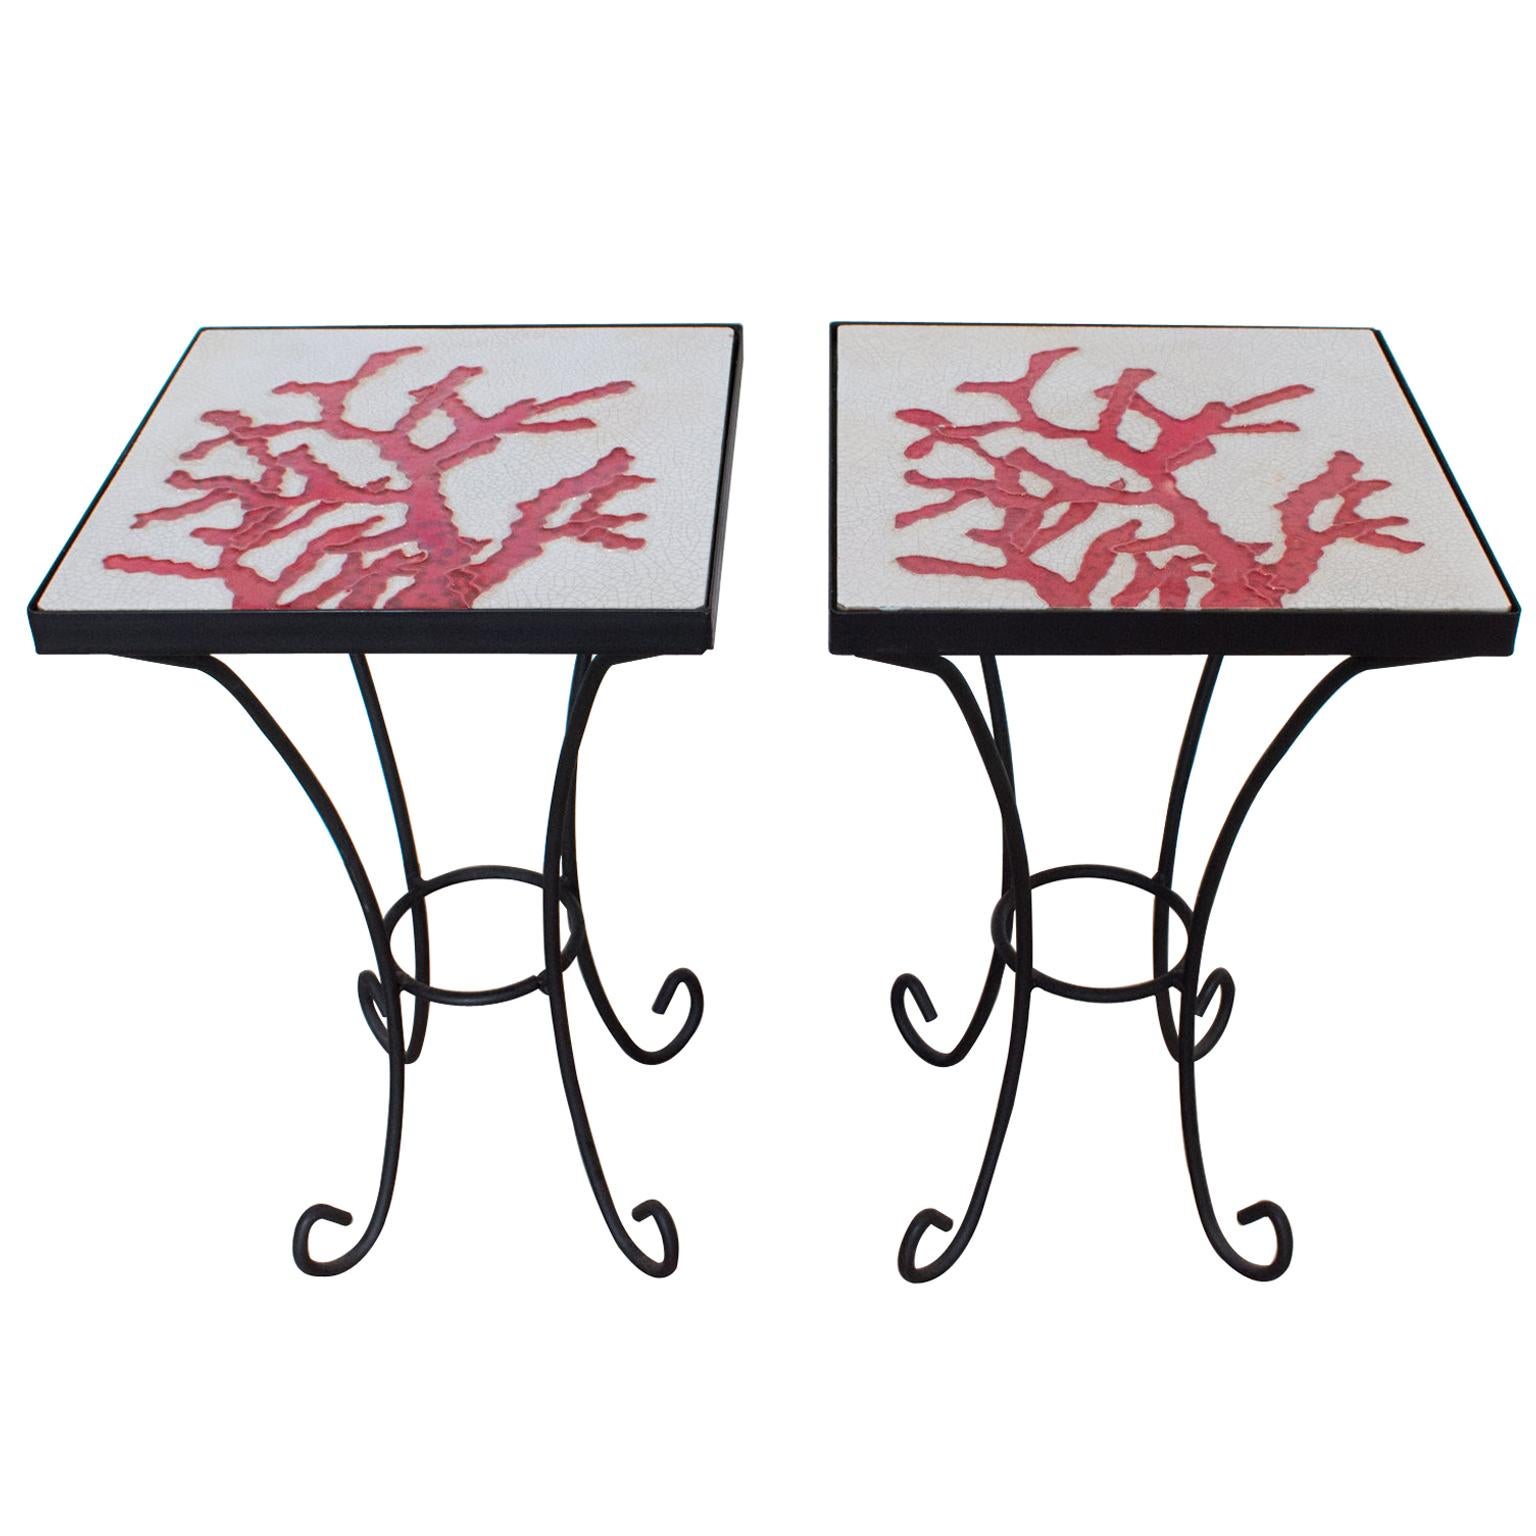 1950s Wrought Iron Ceramic Tile Side Coffee Table, a Pair